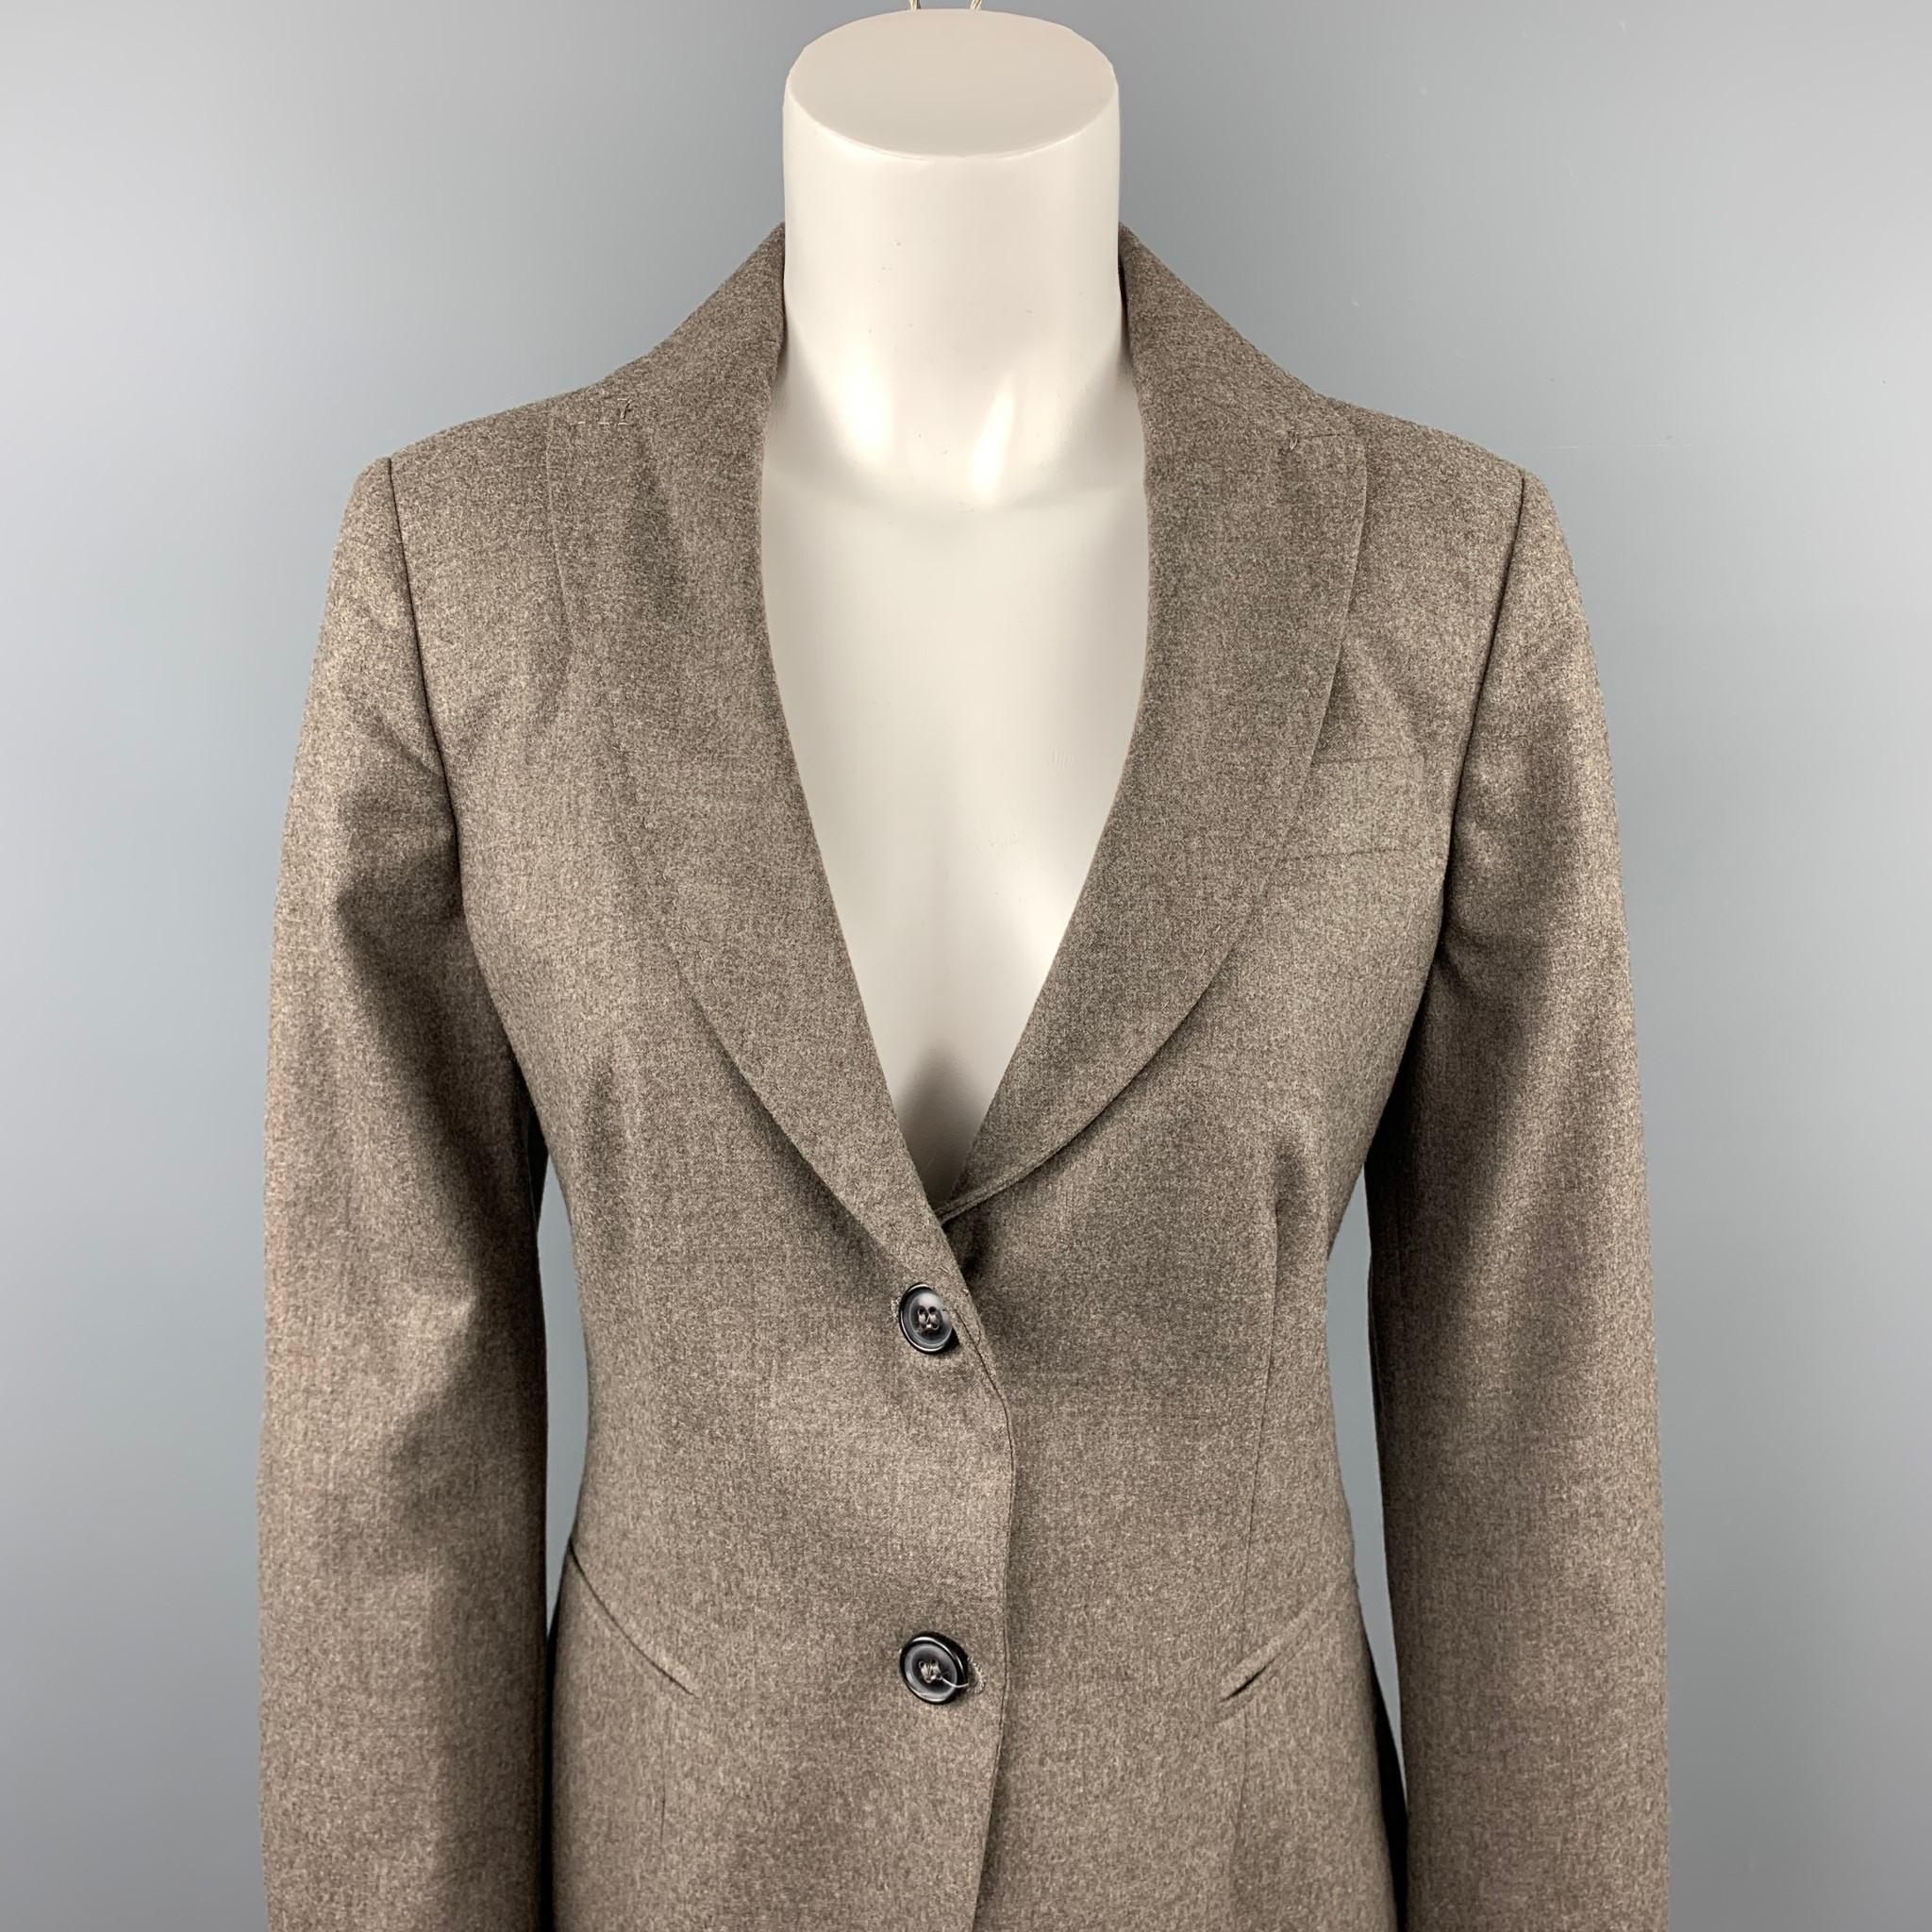 PIAZZA SEMPIONE blazer comes in a taupe wool blend featuring a notch lapel style, slit pockets, and a buttoned closure. Made in Italy.

Very Good Pre-Owned Condition.
Marked: IT 44

Measurements:

Shoulder: 16 in. 
Bust: 34 in. 
Sleeve: 25